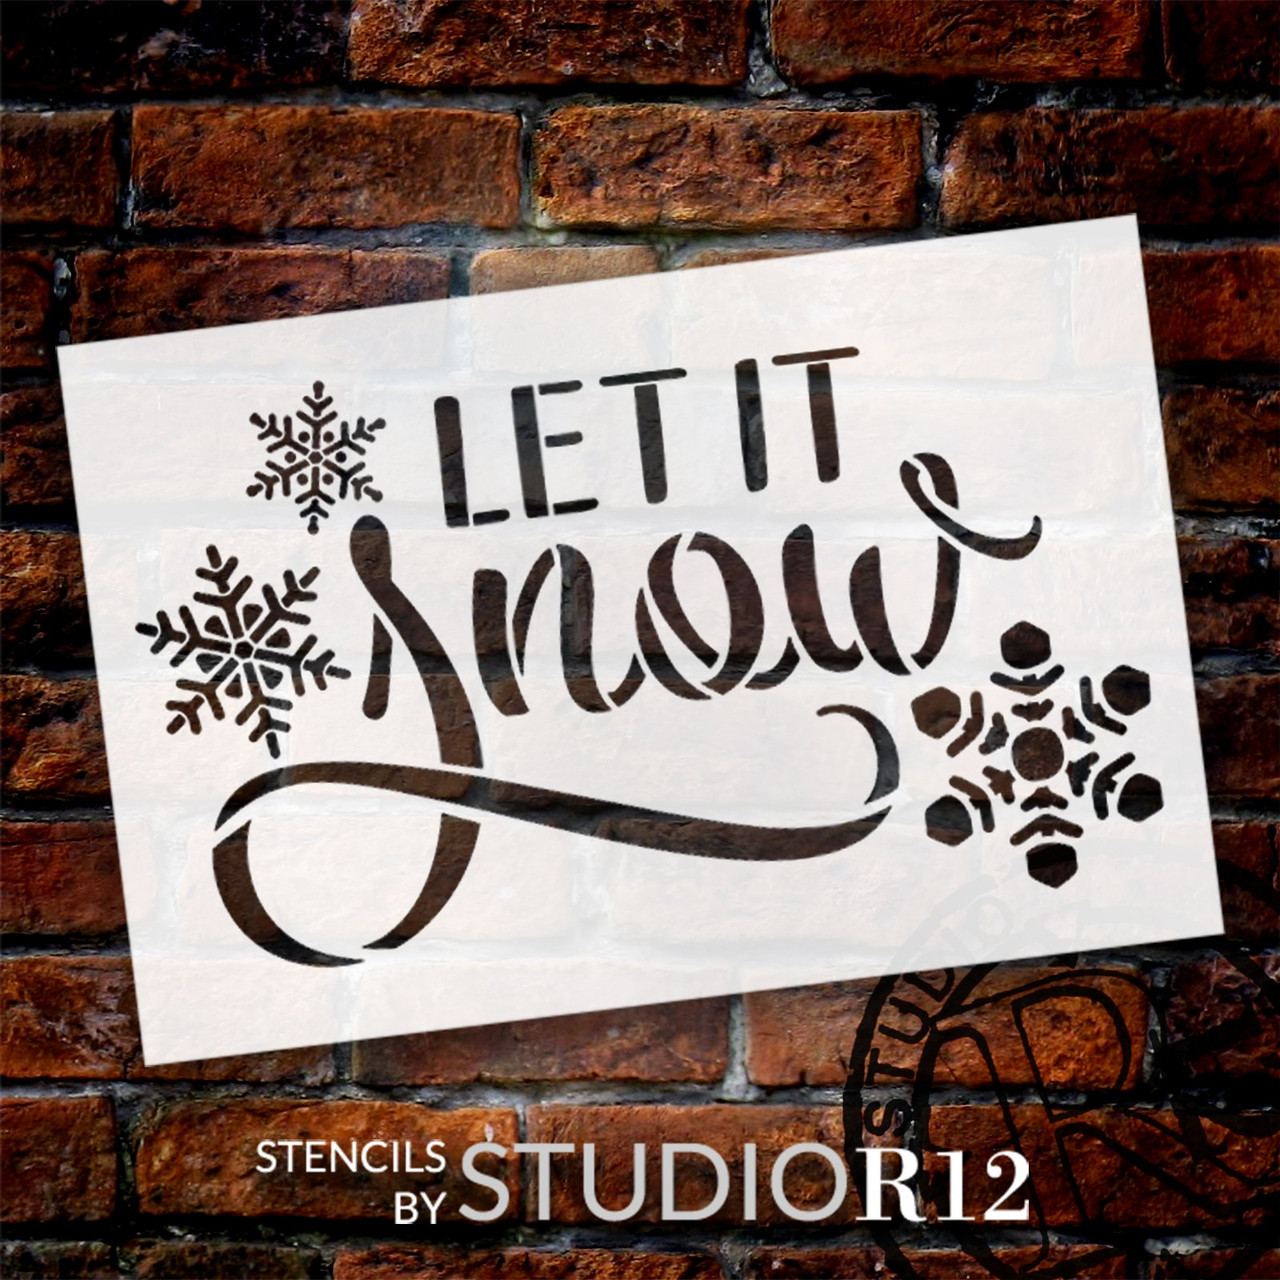 Let It Snow with Snowflakes Stencil by StudioR12 - Select Size - USA Made - Craft DIY Christmas Home Decor | Paint Holiday Word Art Sign | Reusable Mylar Template